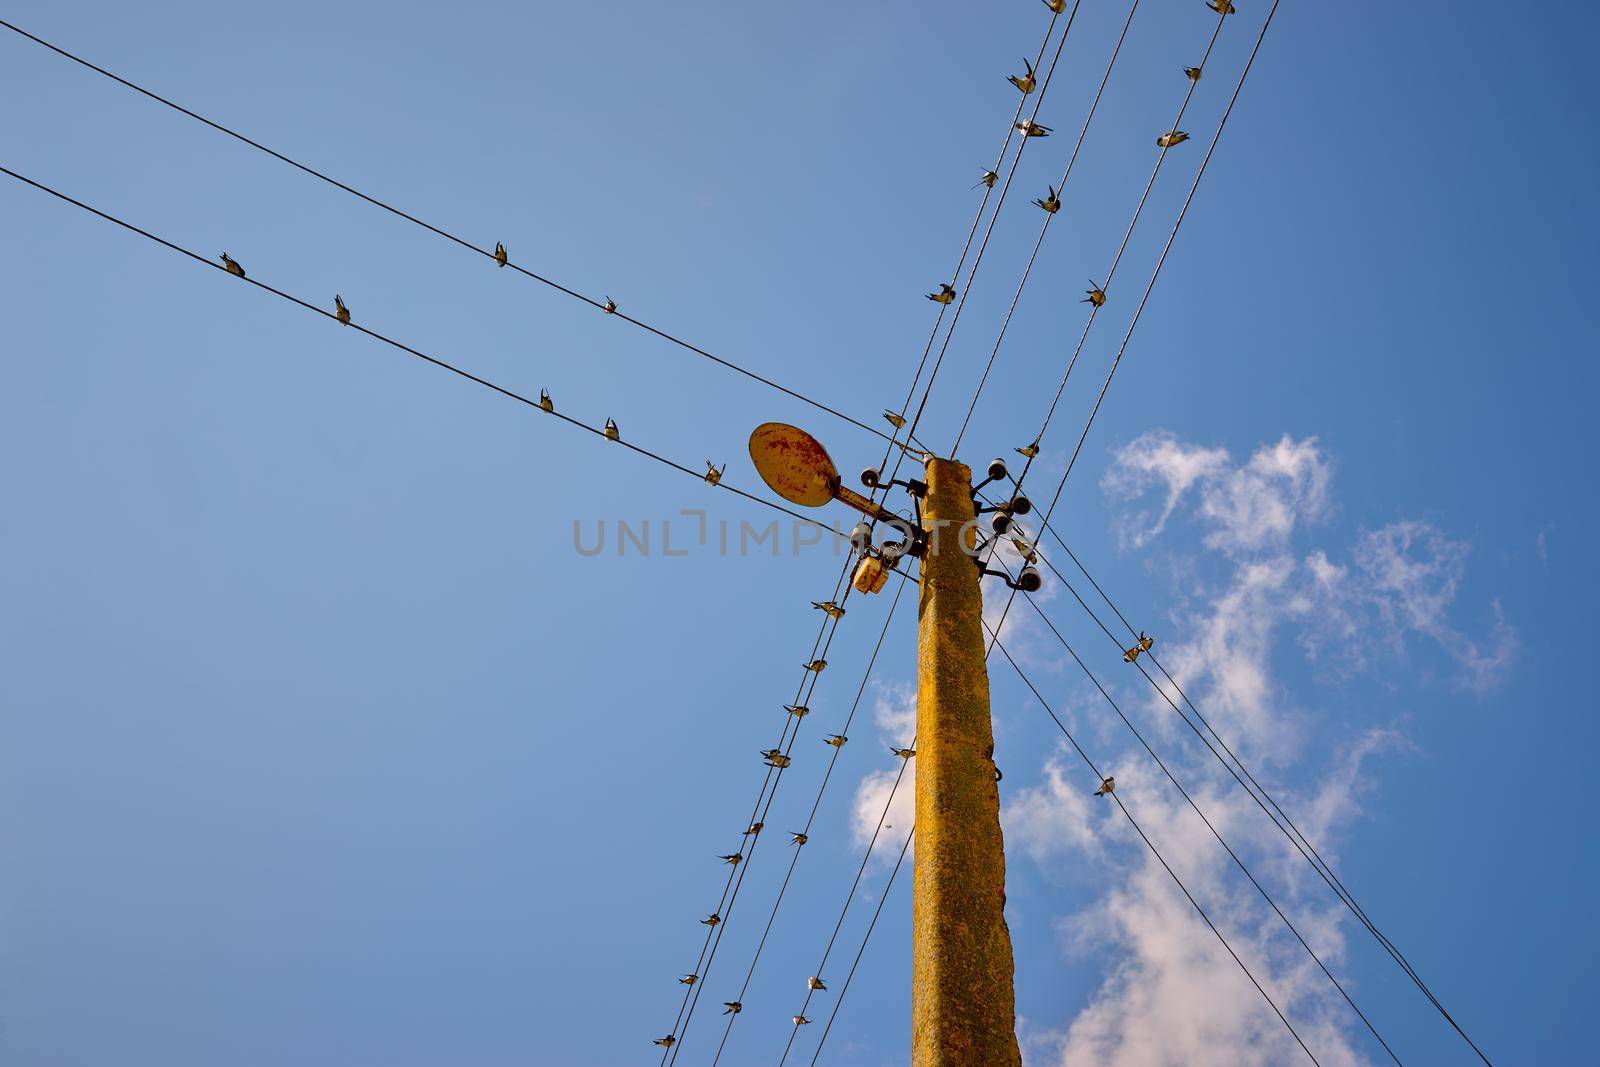 A flock of swallows against the blue sky on an electrical support on wires.